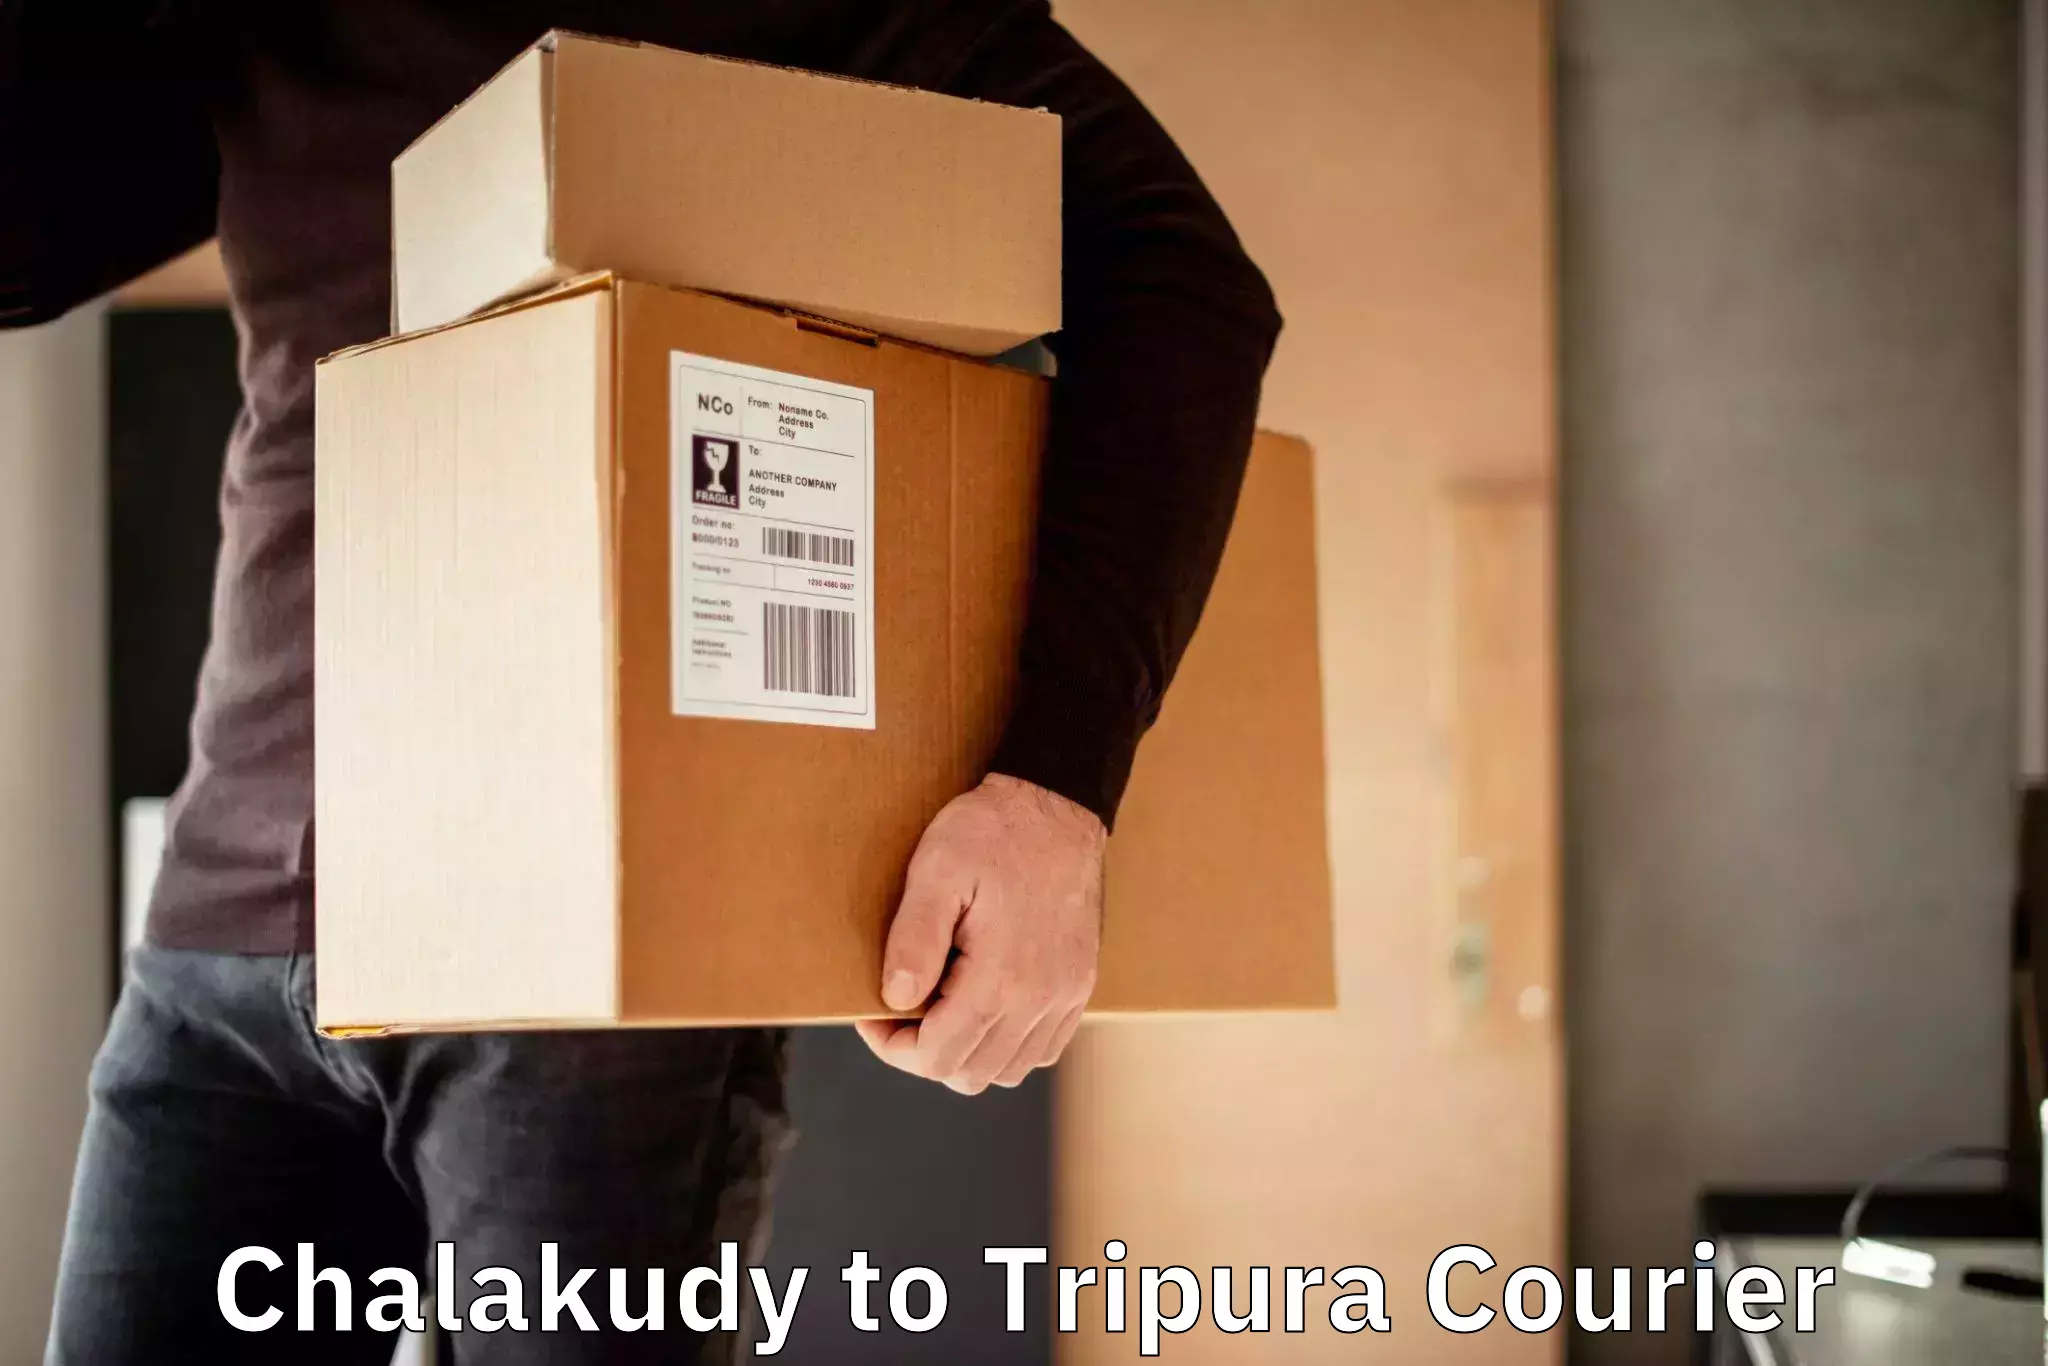 Courier service innovation Chalakudy to Tripura